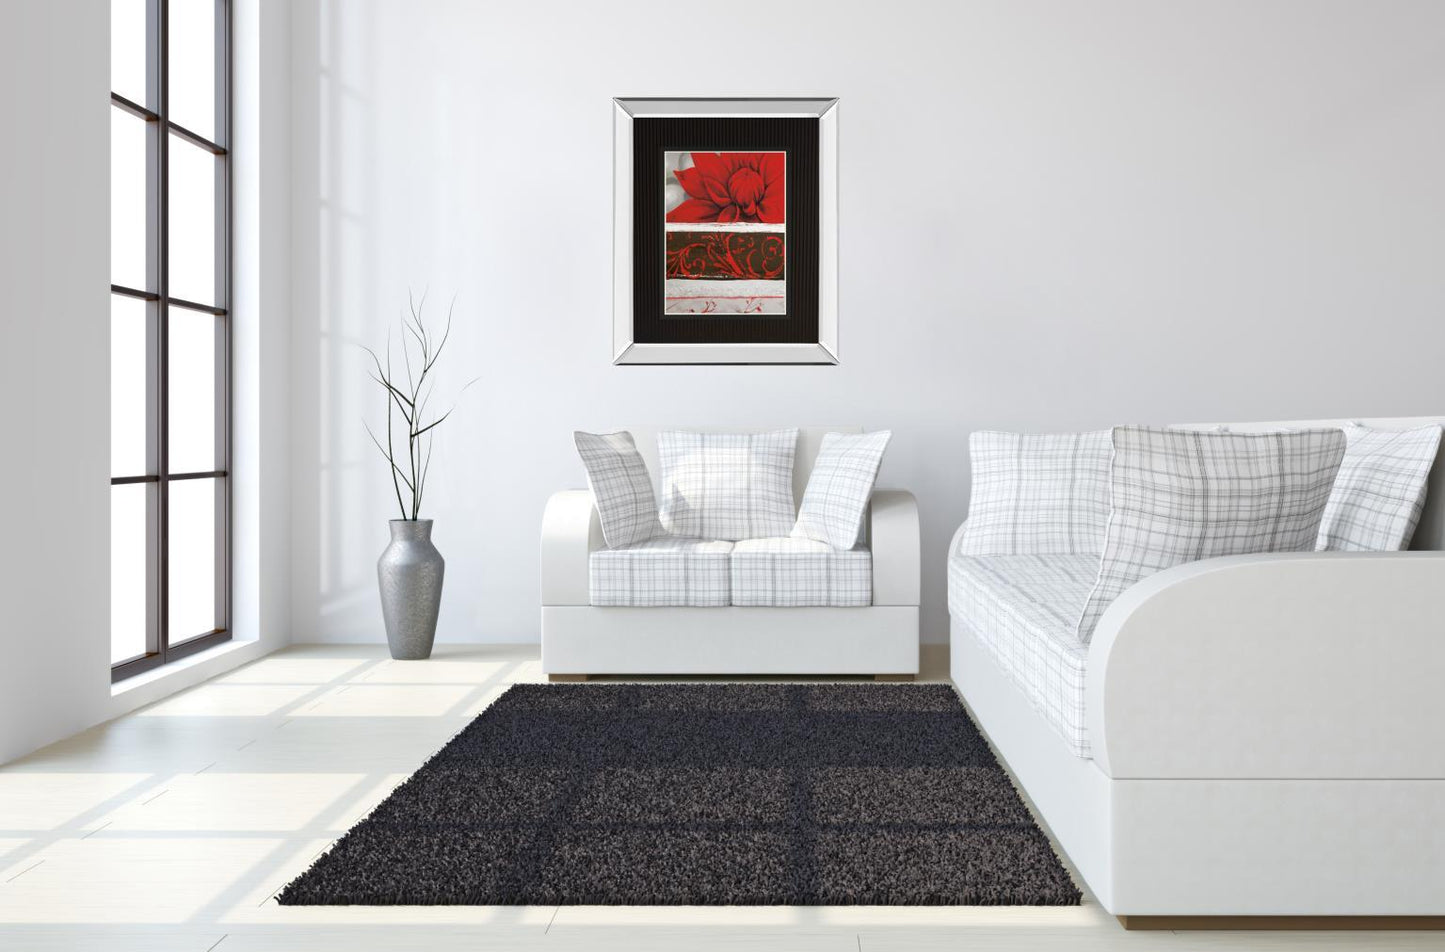 Sumptuous Red By Jasmin Zara Copley - Mirror Framed Print Wall Art - Red